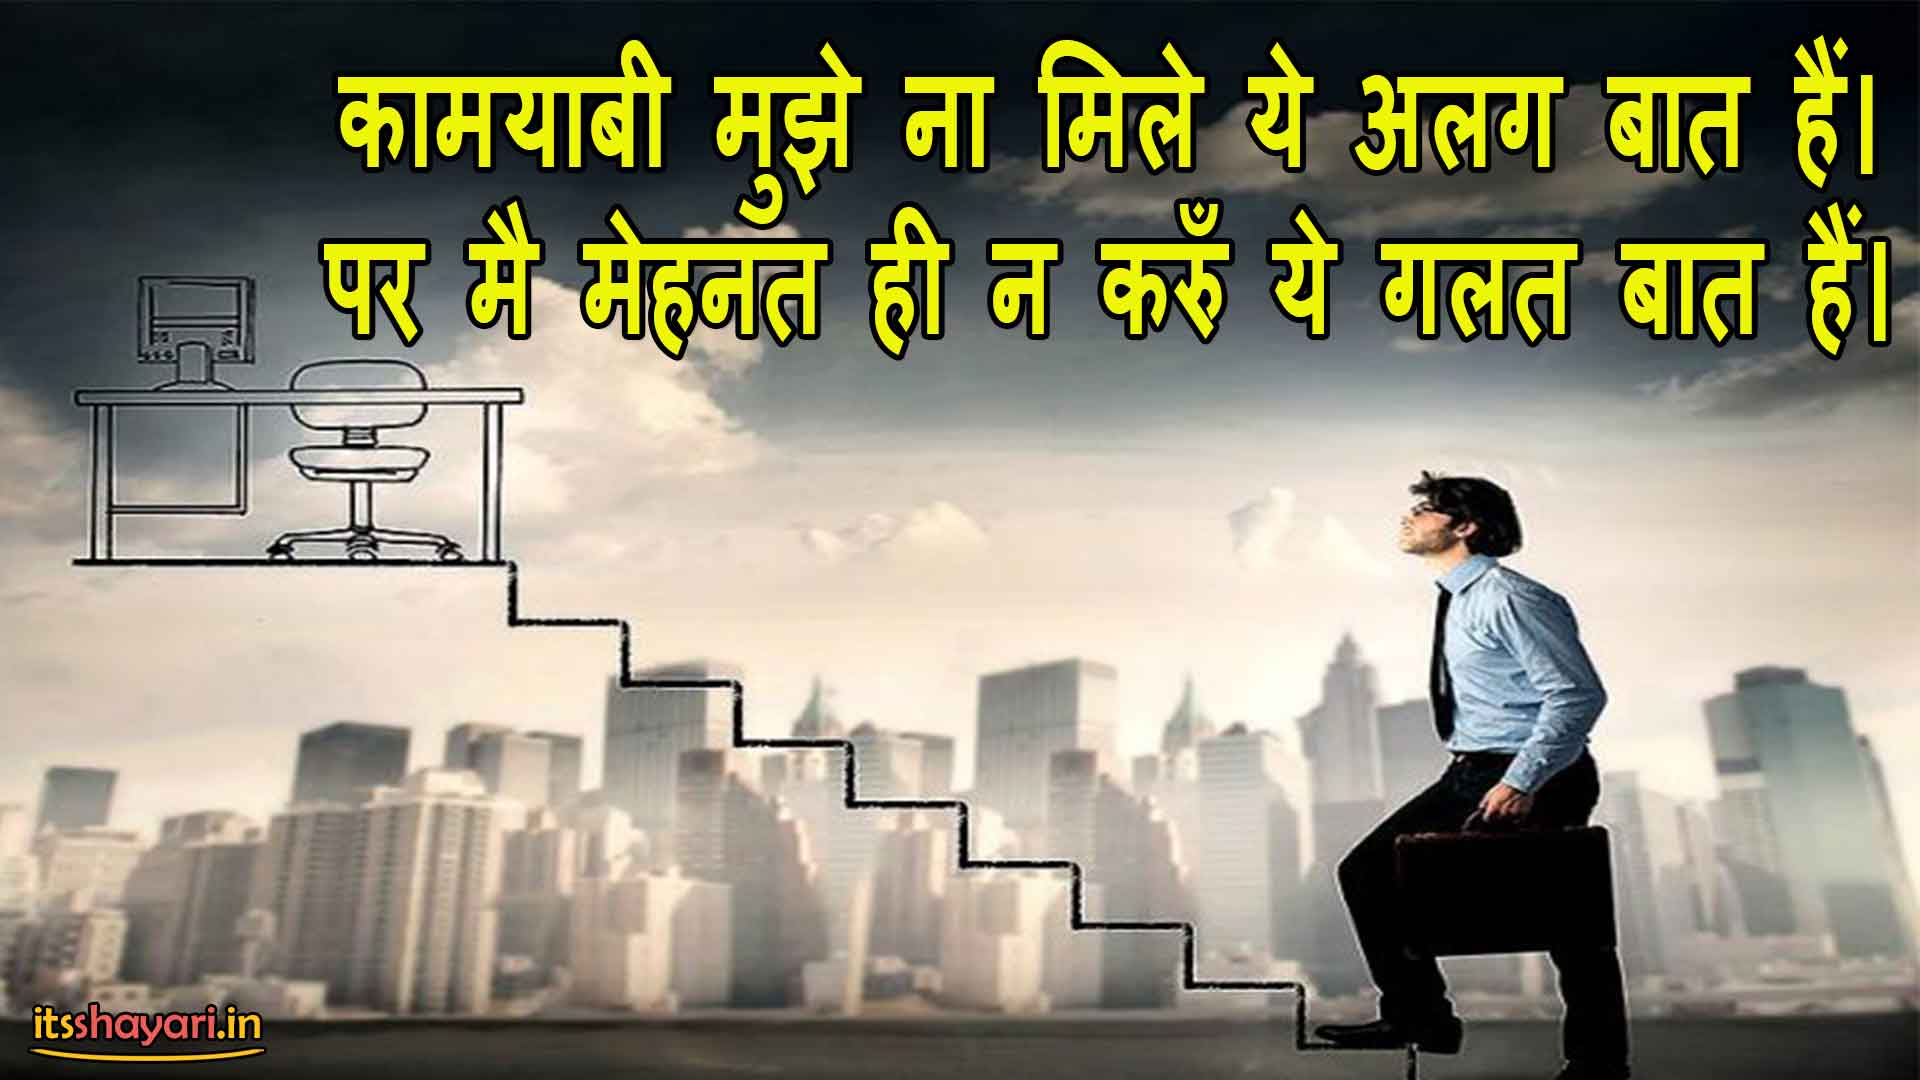 100 motivational quotes in Hindi 2022